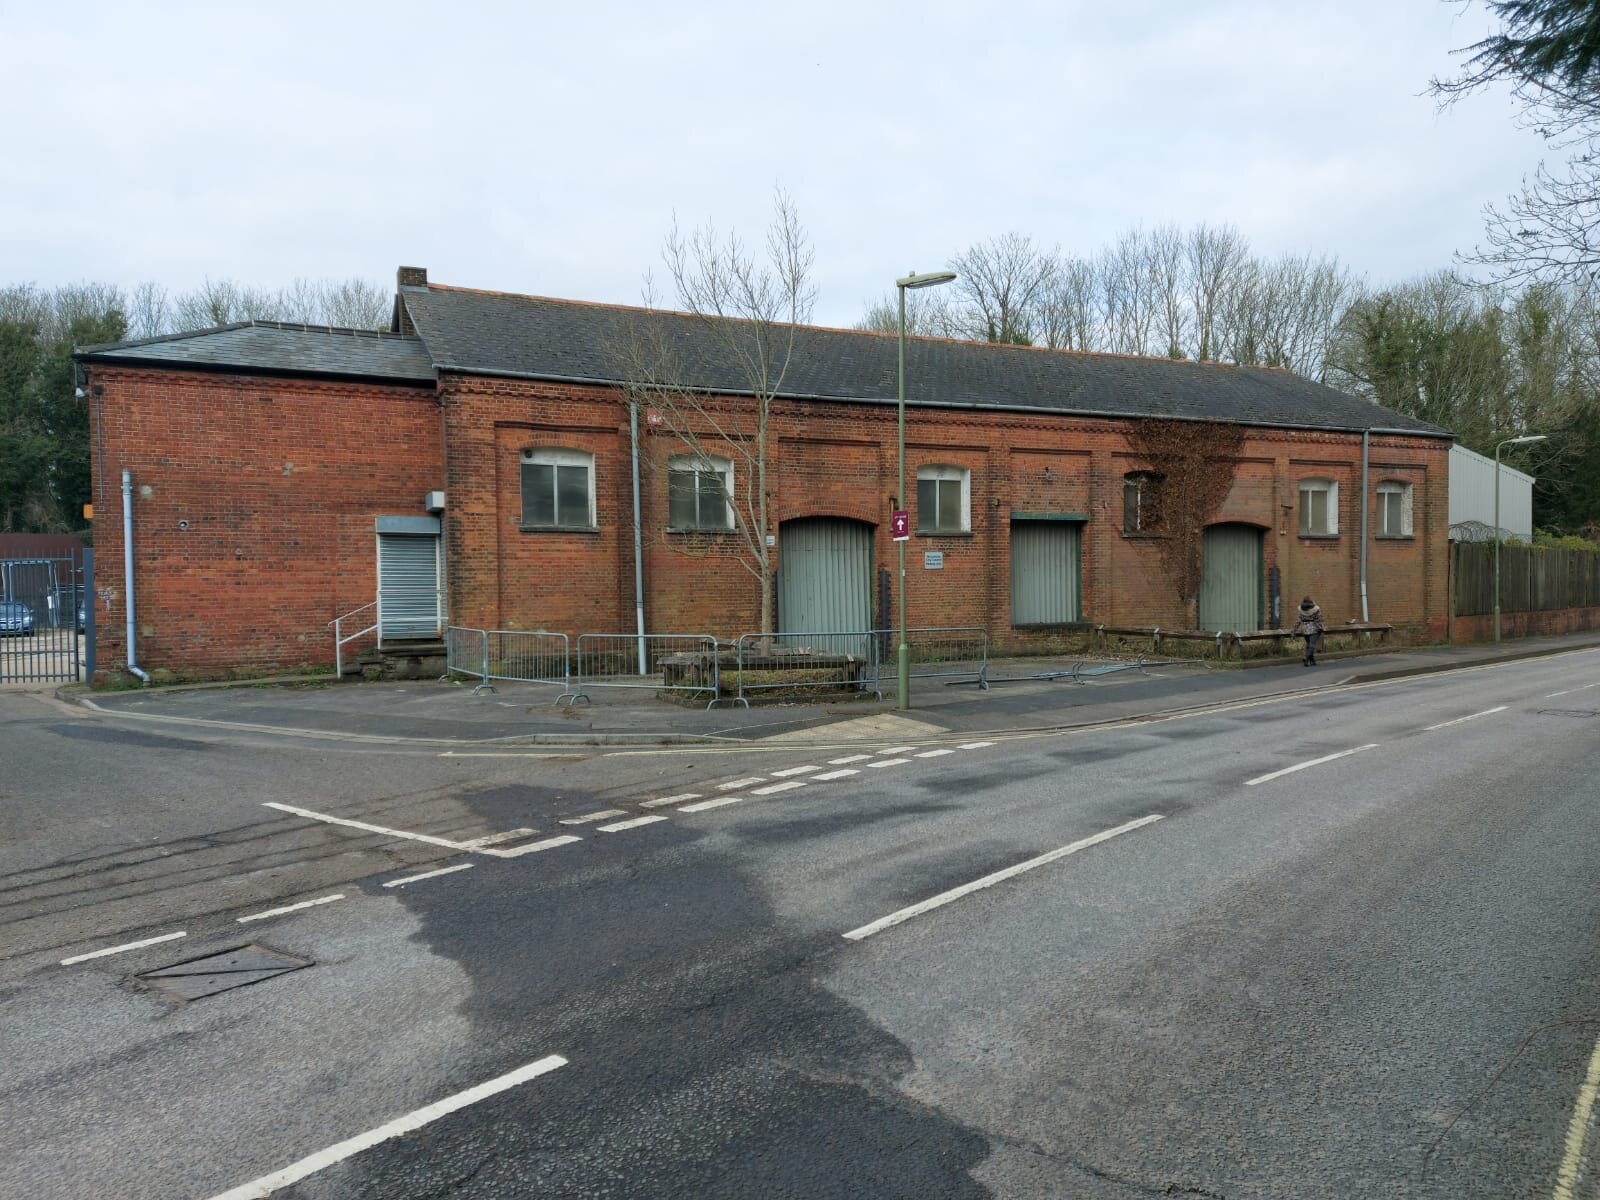  The Old Goods Shed 